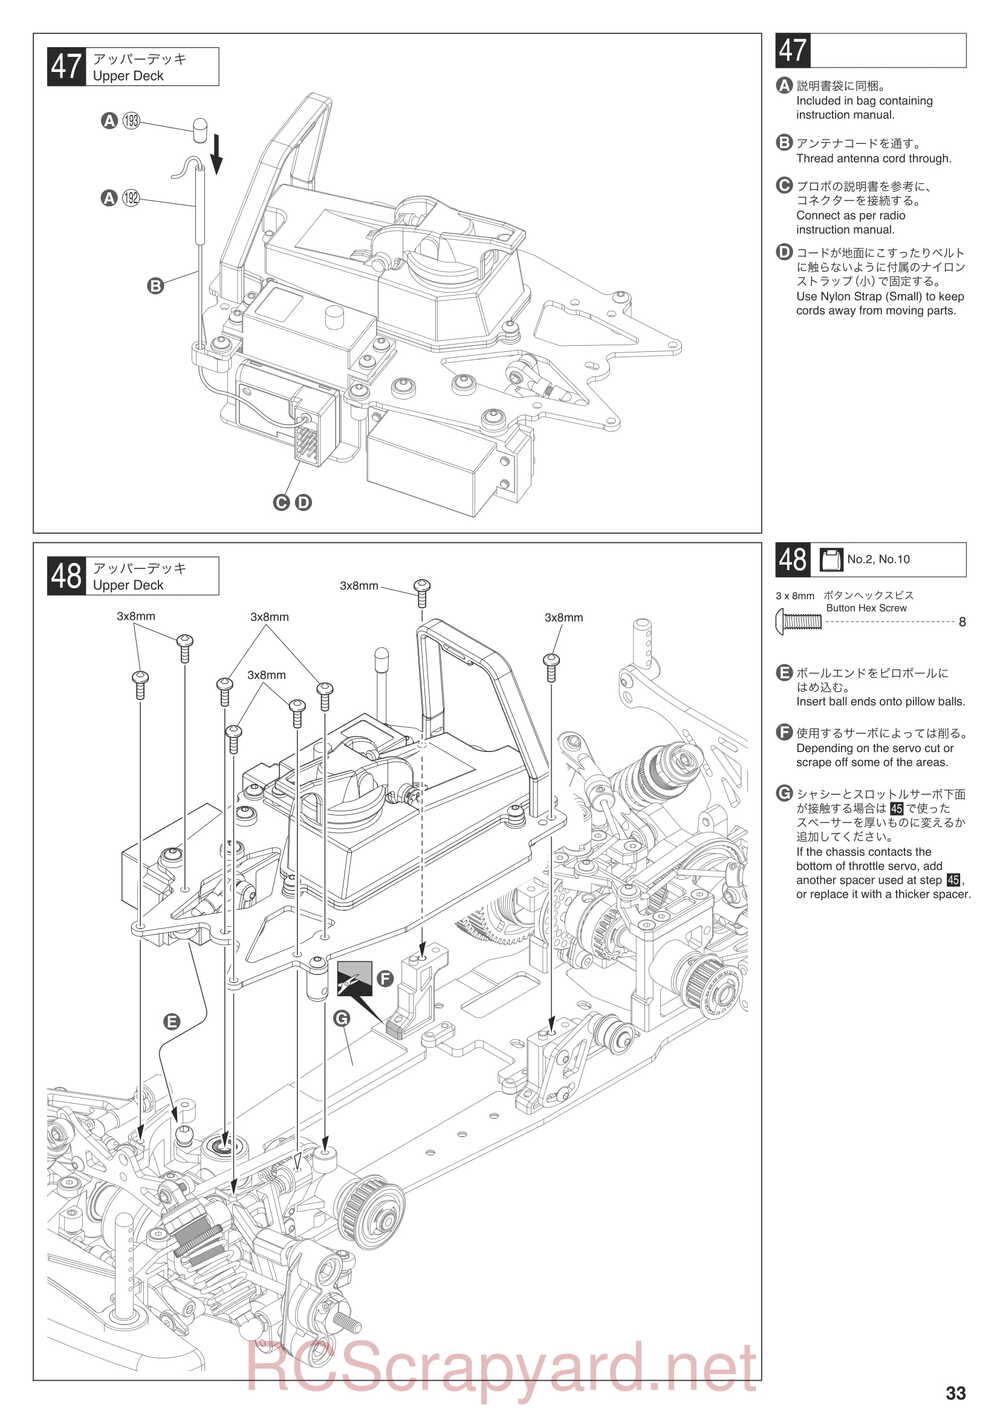 Kyosho - 31265 - V-ONE-R4 - Manual - Page 33